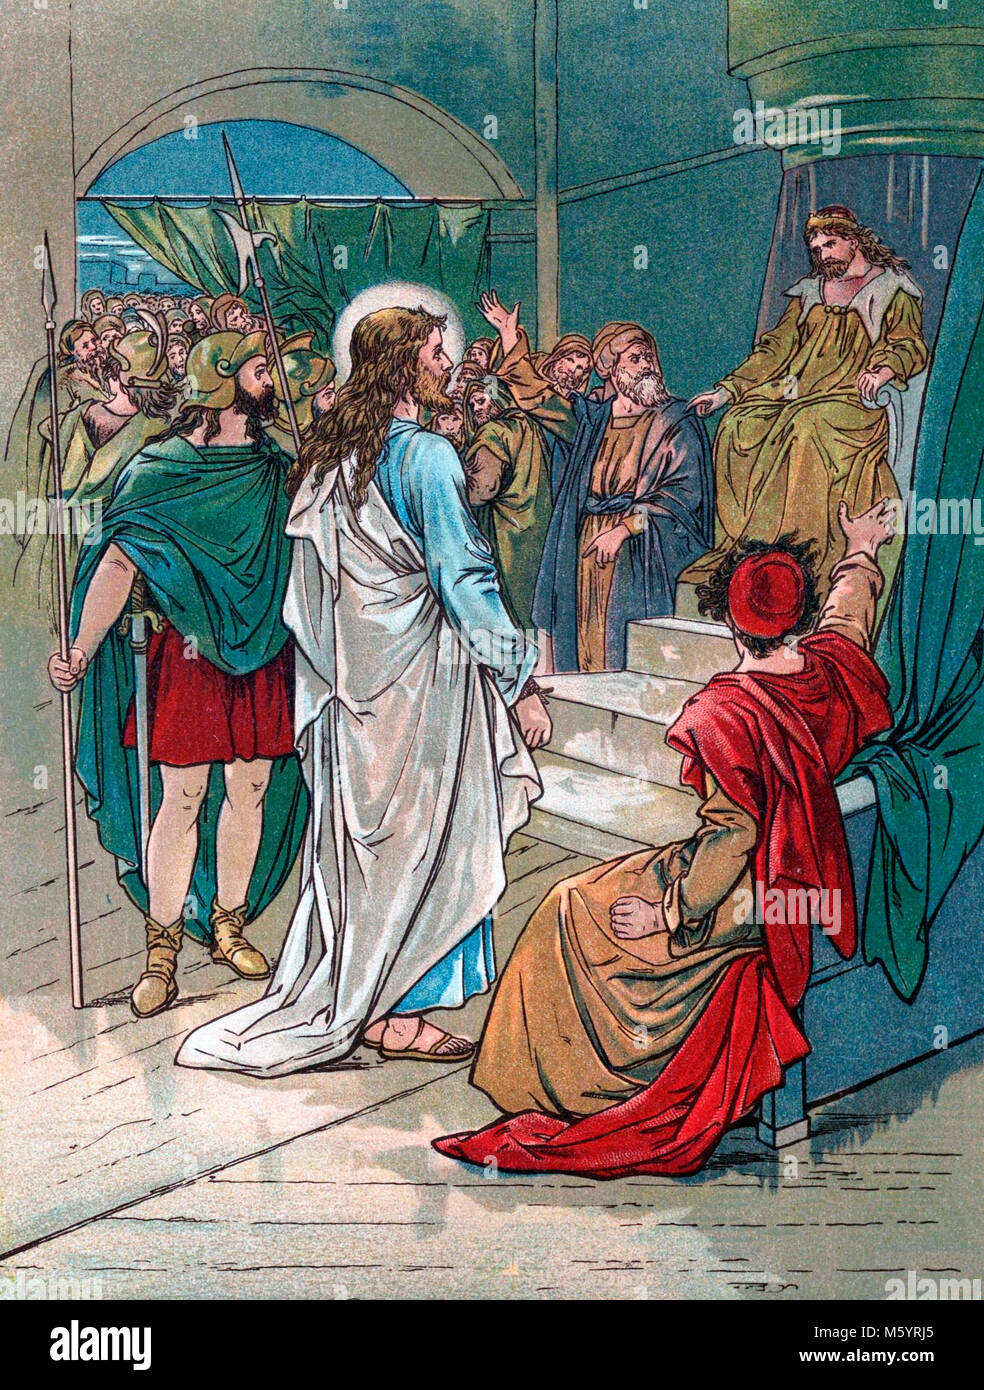 Jesus appearing before Pontius Pilate. Illustration from 'A Child's Story of the Bible' by Mary Lathbury, published in 1898. Stock Photo